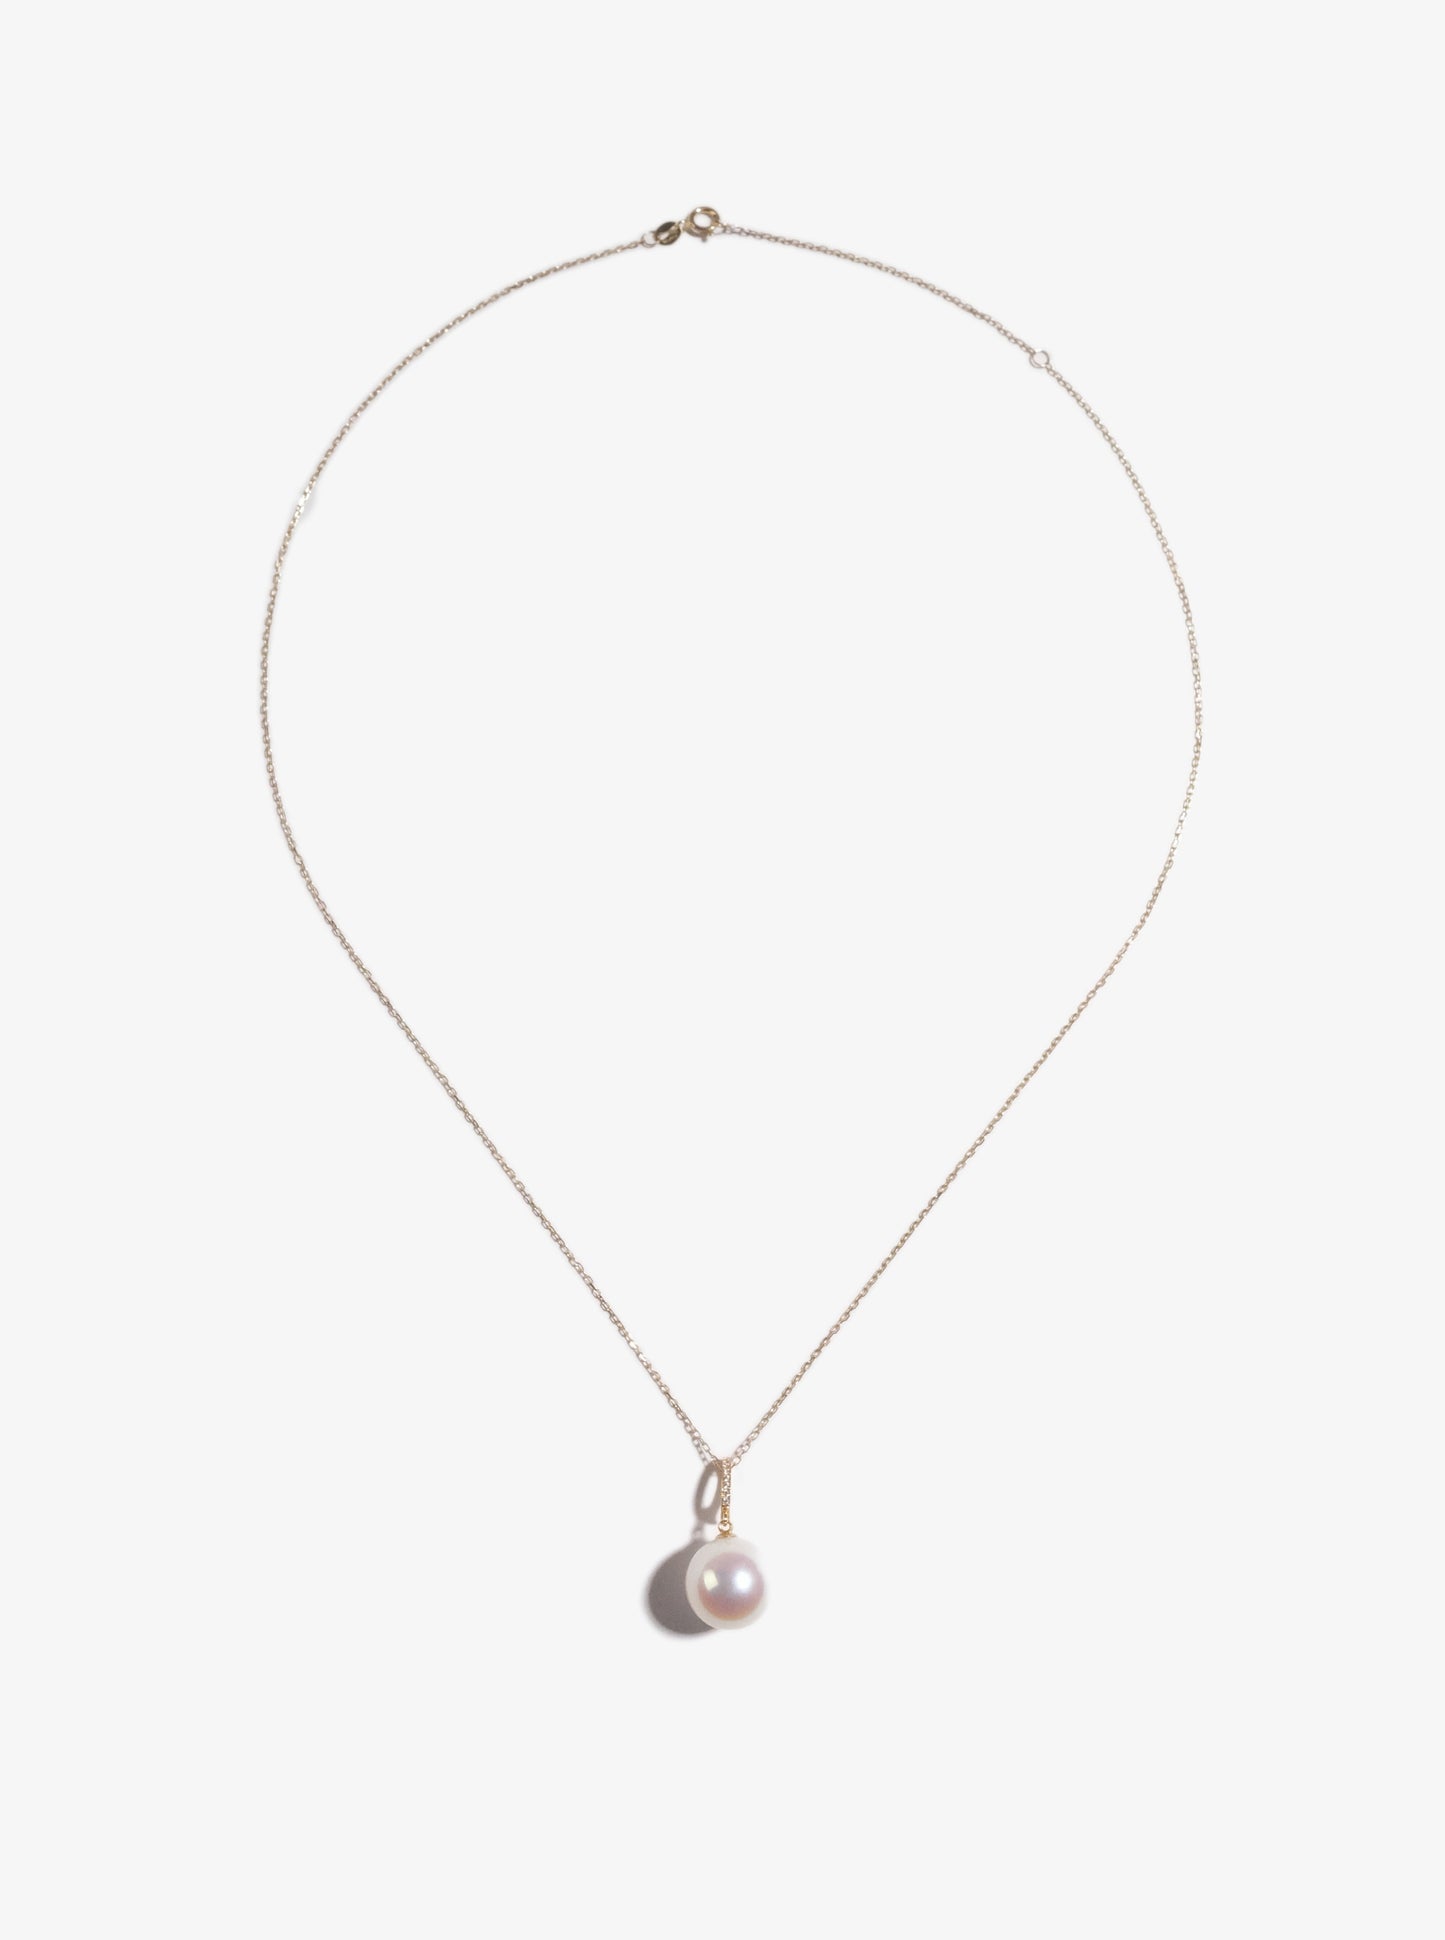 Freshwater Pearl Pendant With 18K Gold  FP18K25